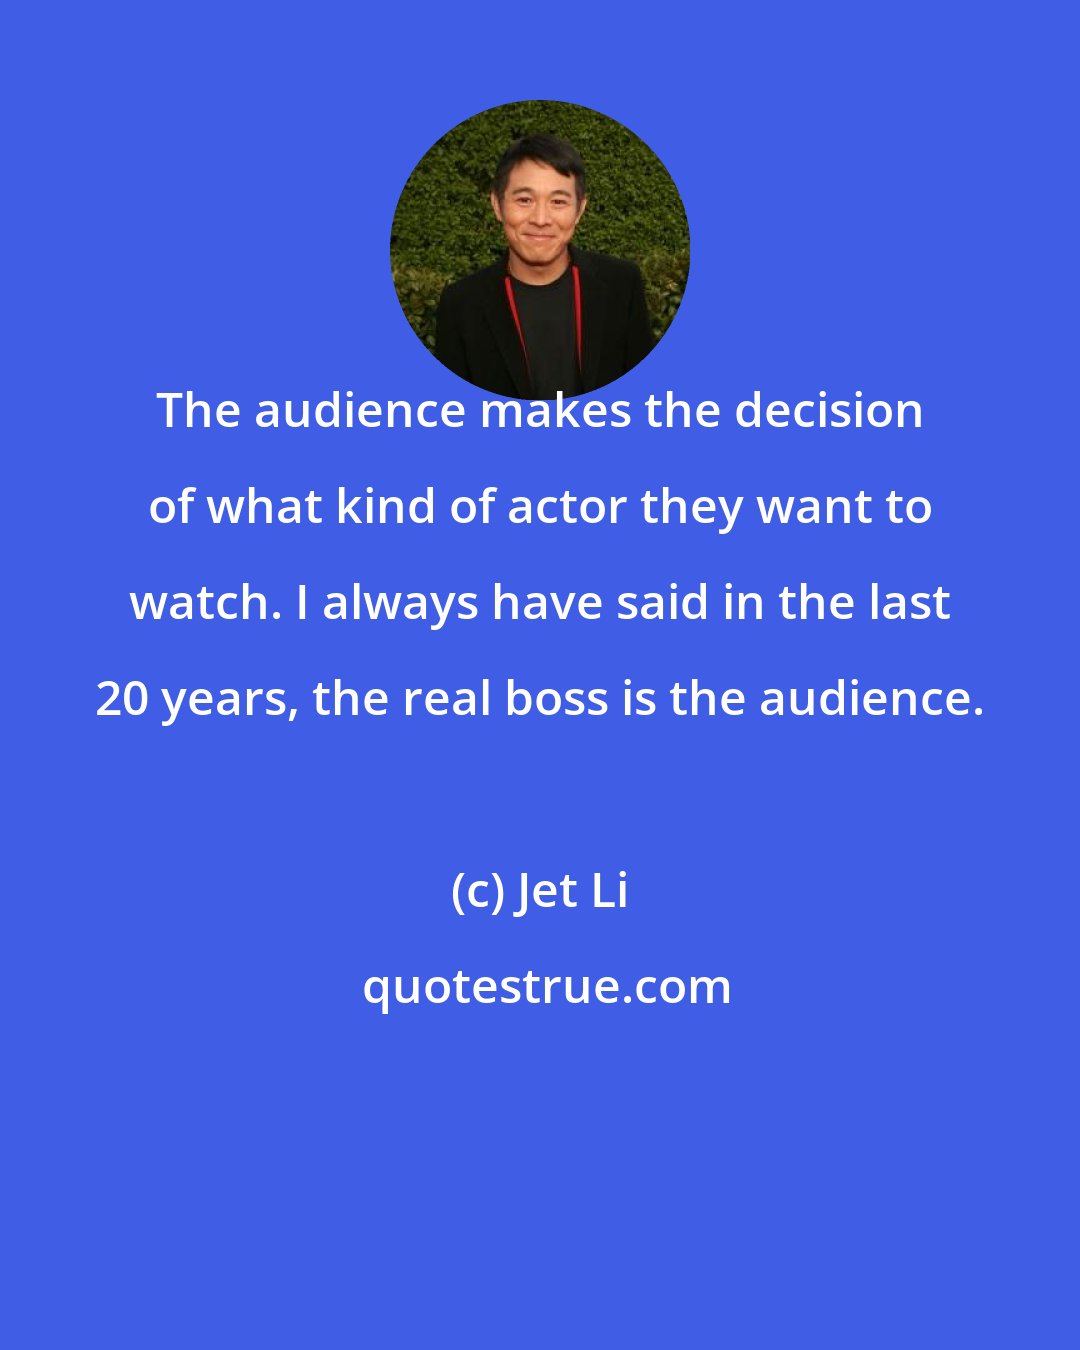 Jet Li: The audience makes the decision of what kind of actor they want to watch. I always have said in the last 20 years, the real boss is the audience.